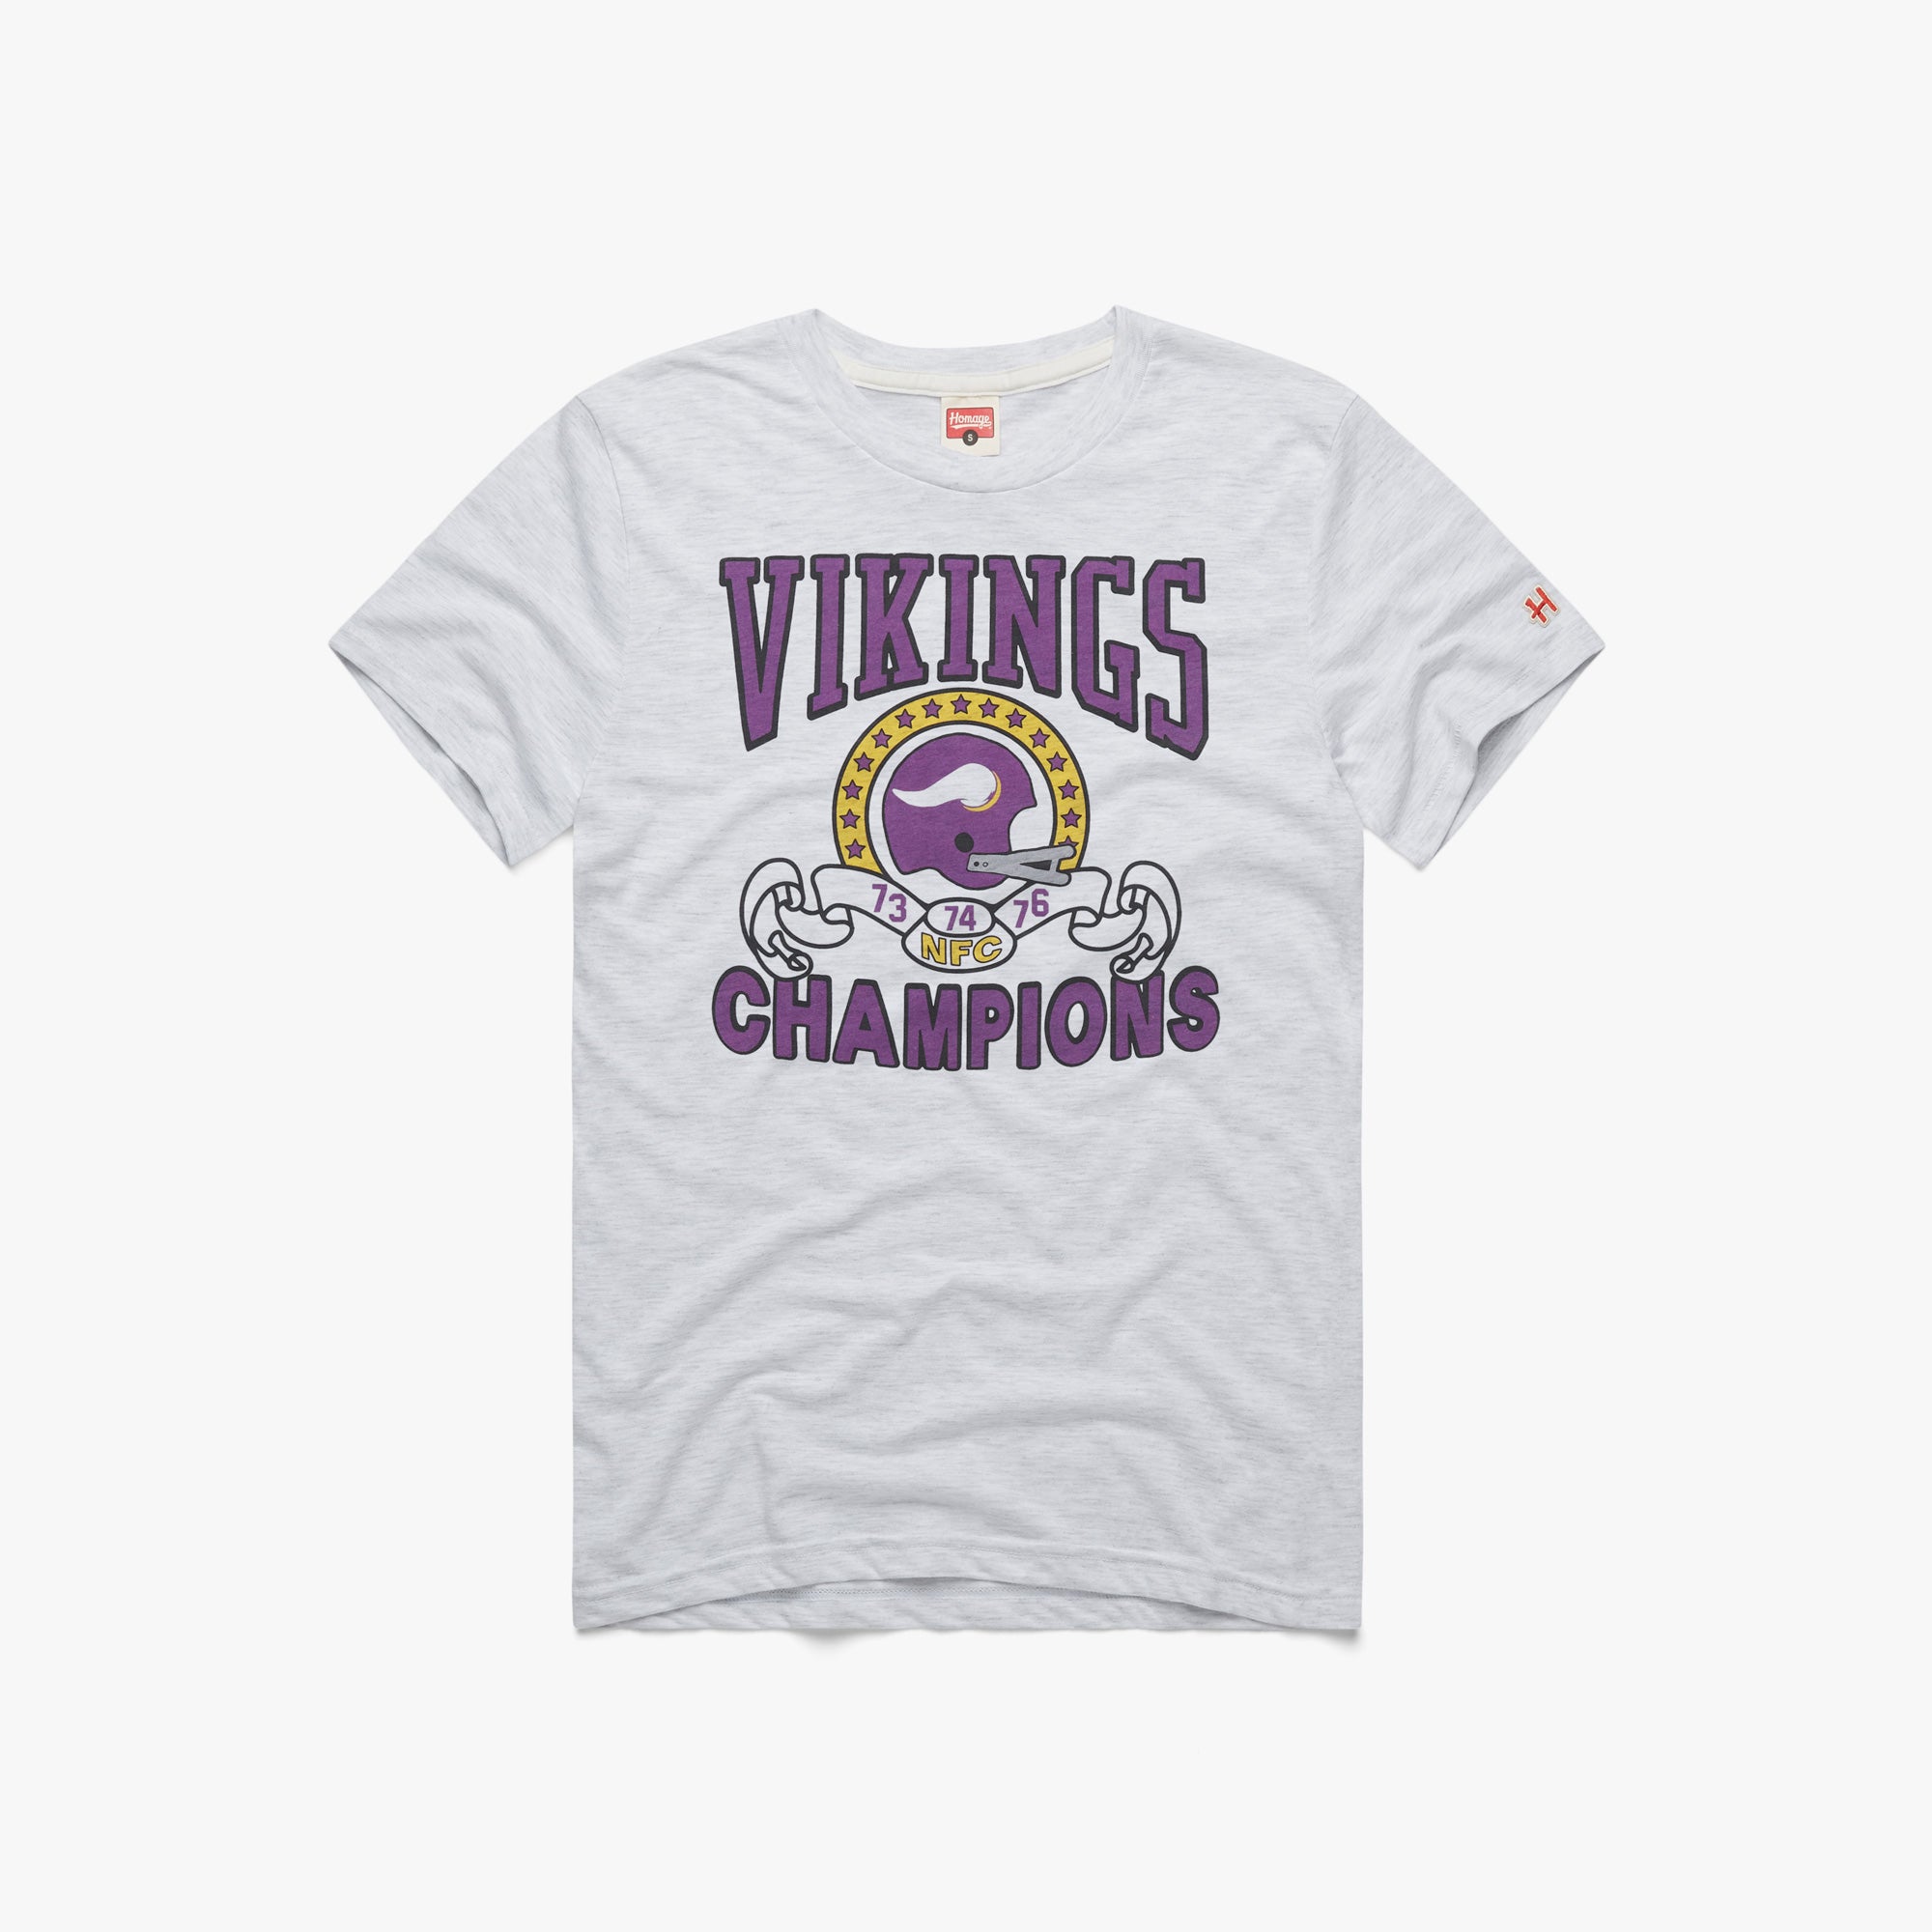 Minnesota Vikings 3 Time NFC Champions T-Shirt from Homage. | Officially Licensed Vintage NFL Apparel from Homage Pro Shop.